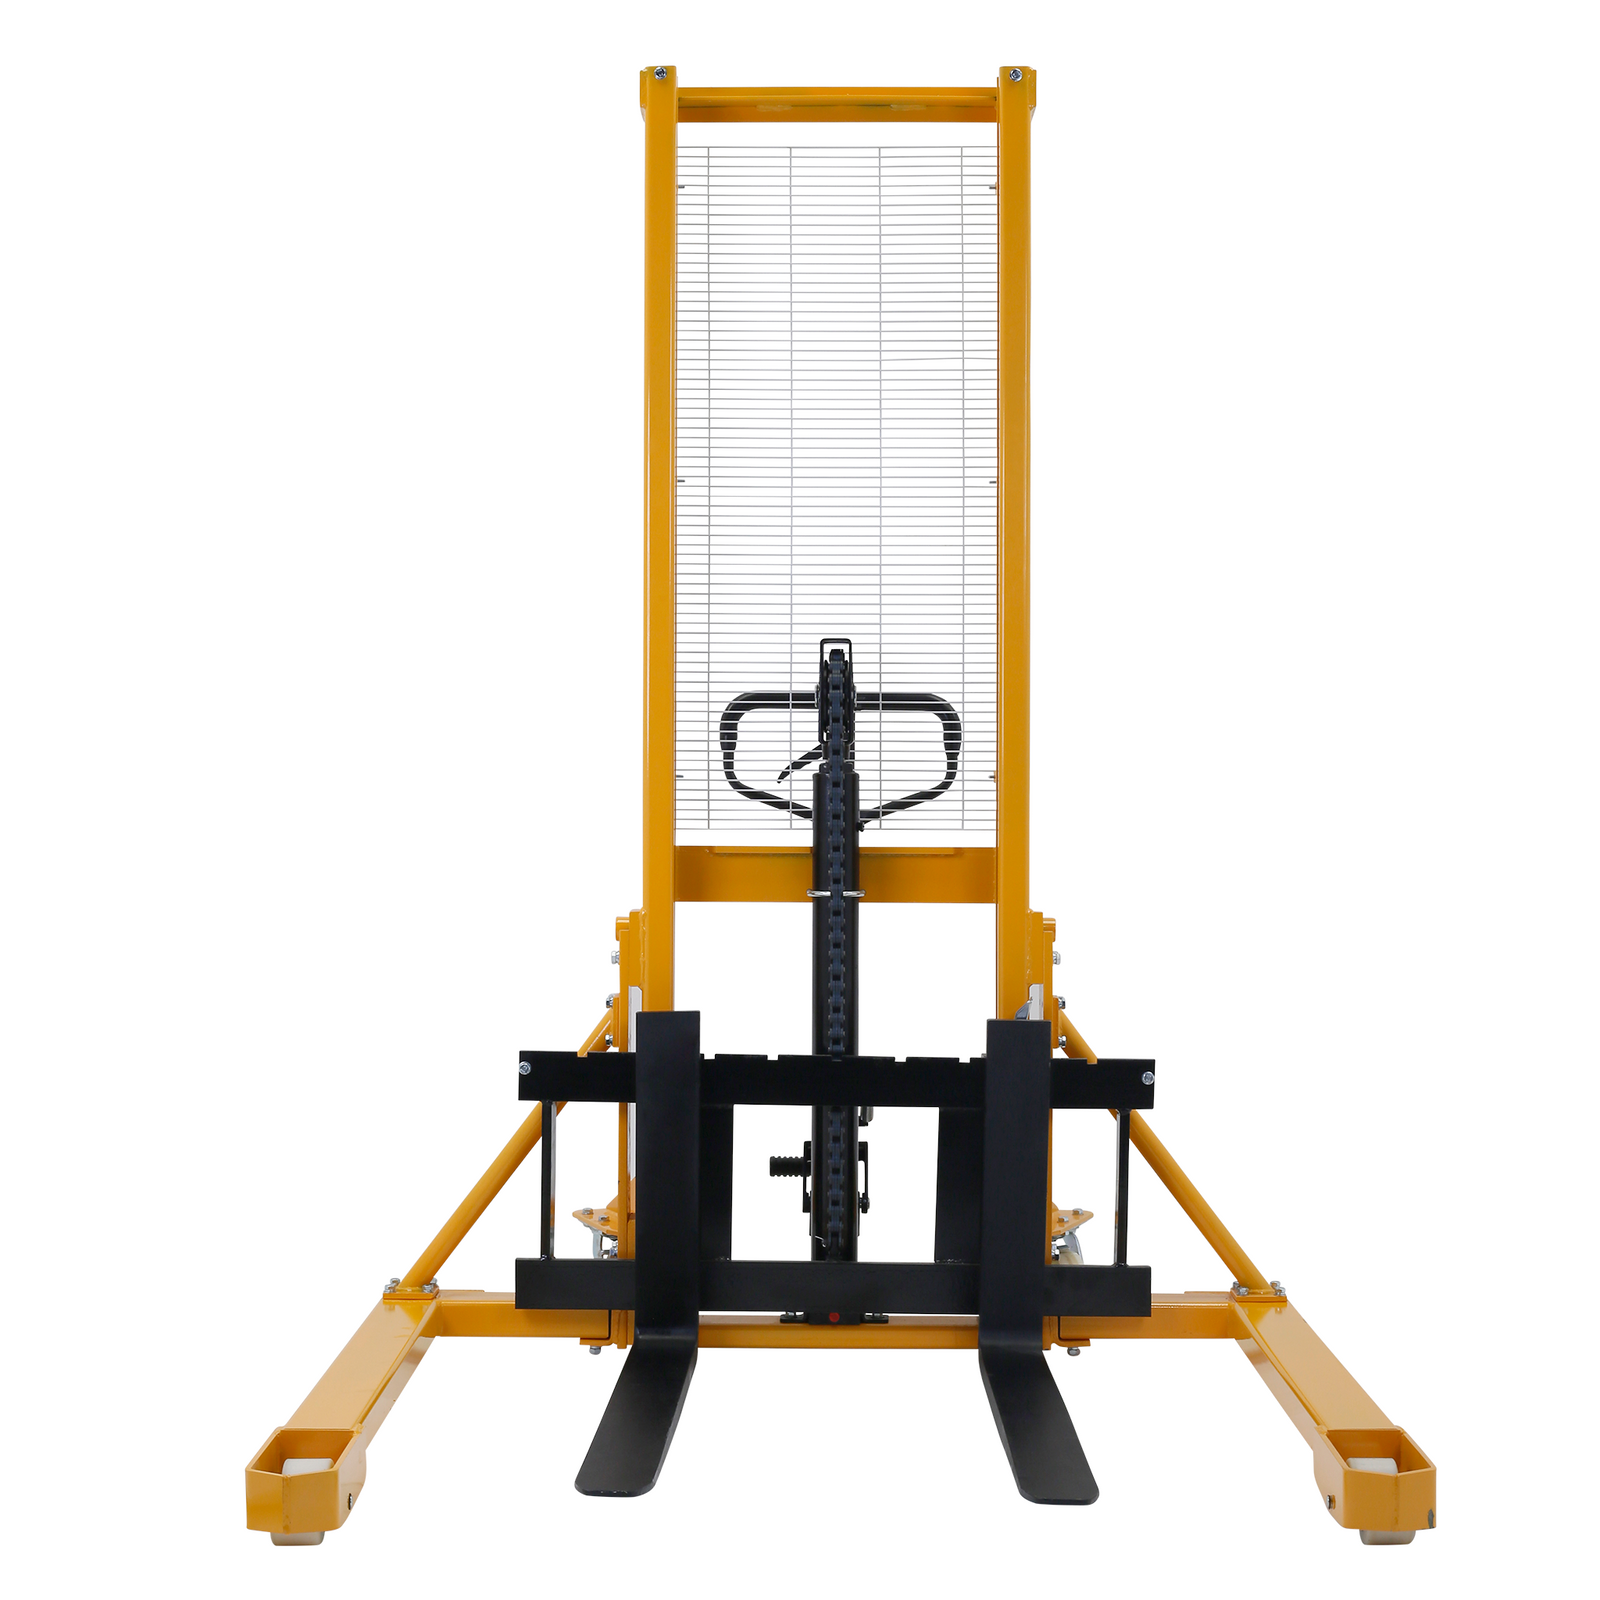 Front view of a yellow and black JORESTECH manual pallet stacker with the nails down